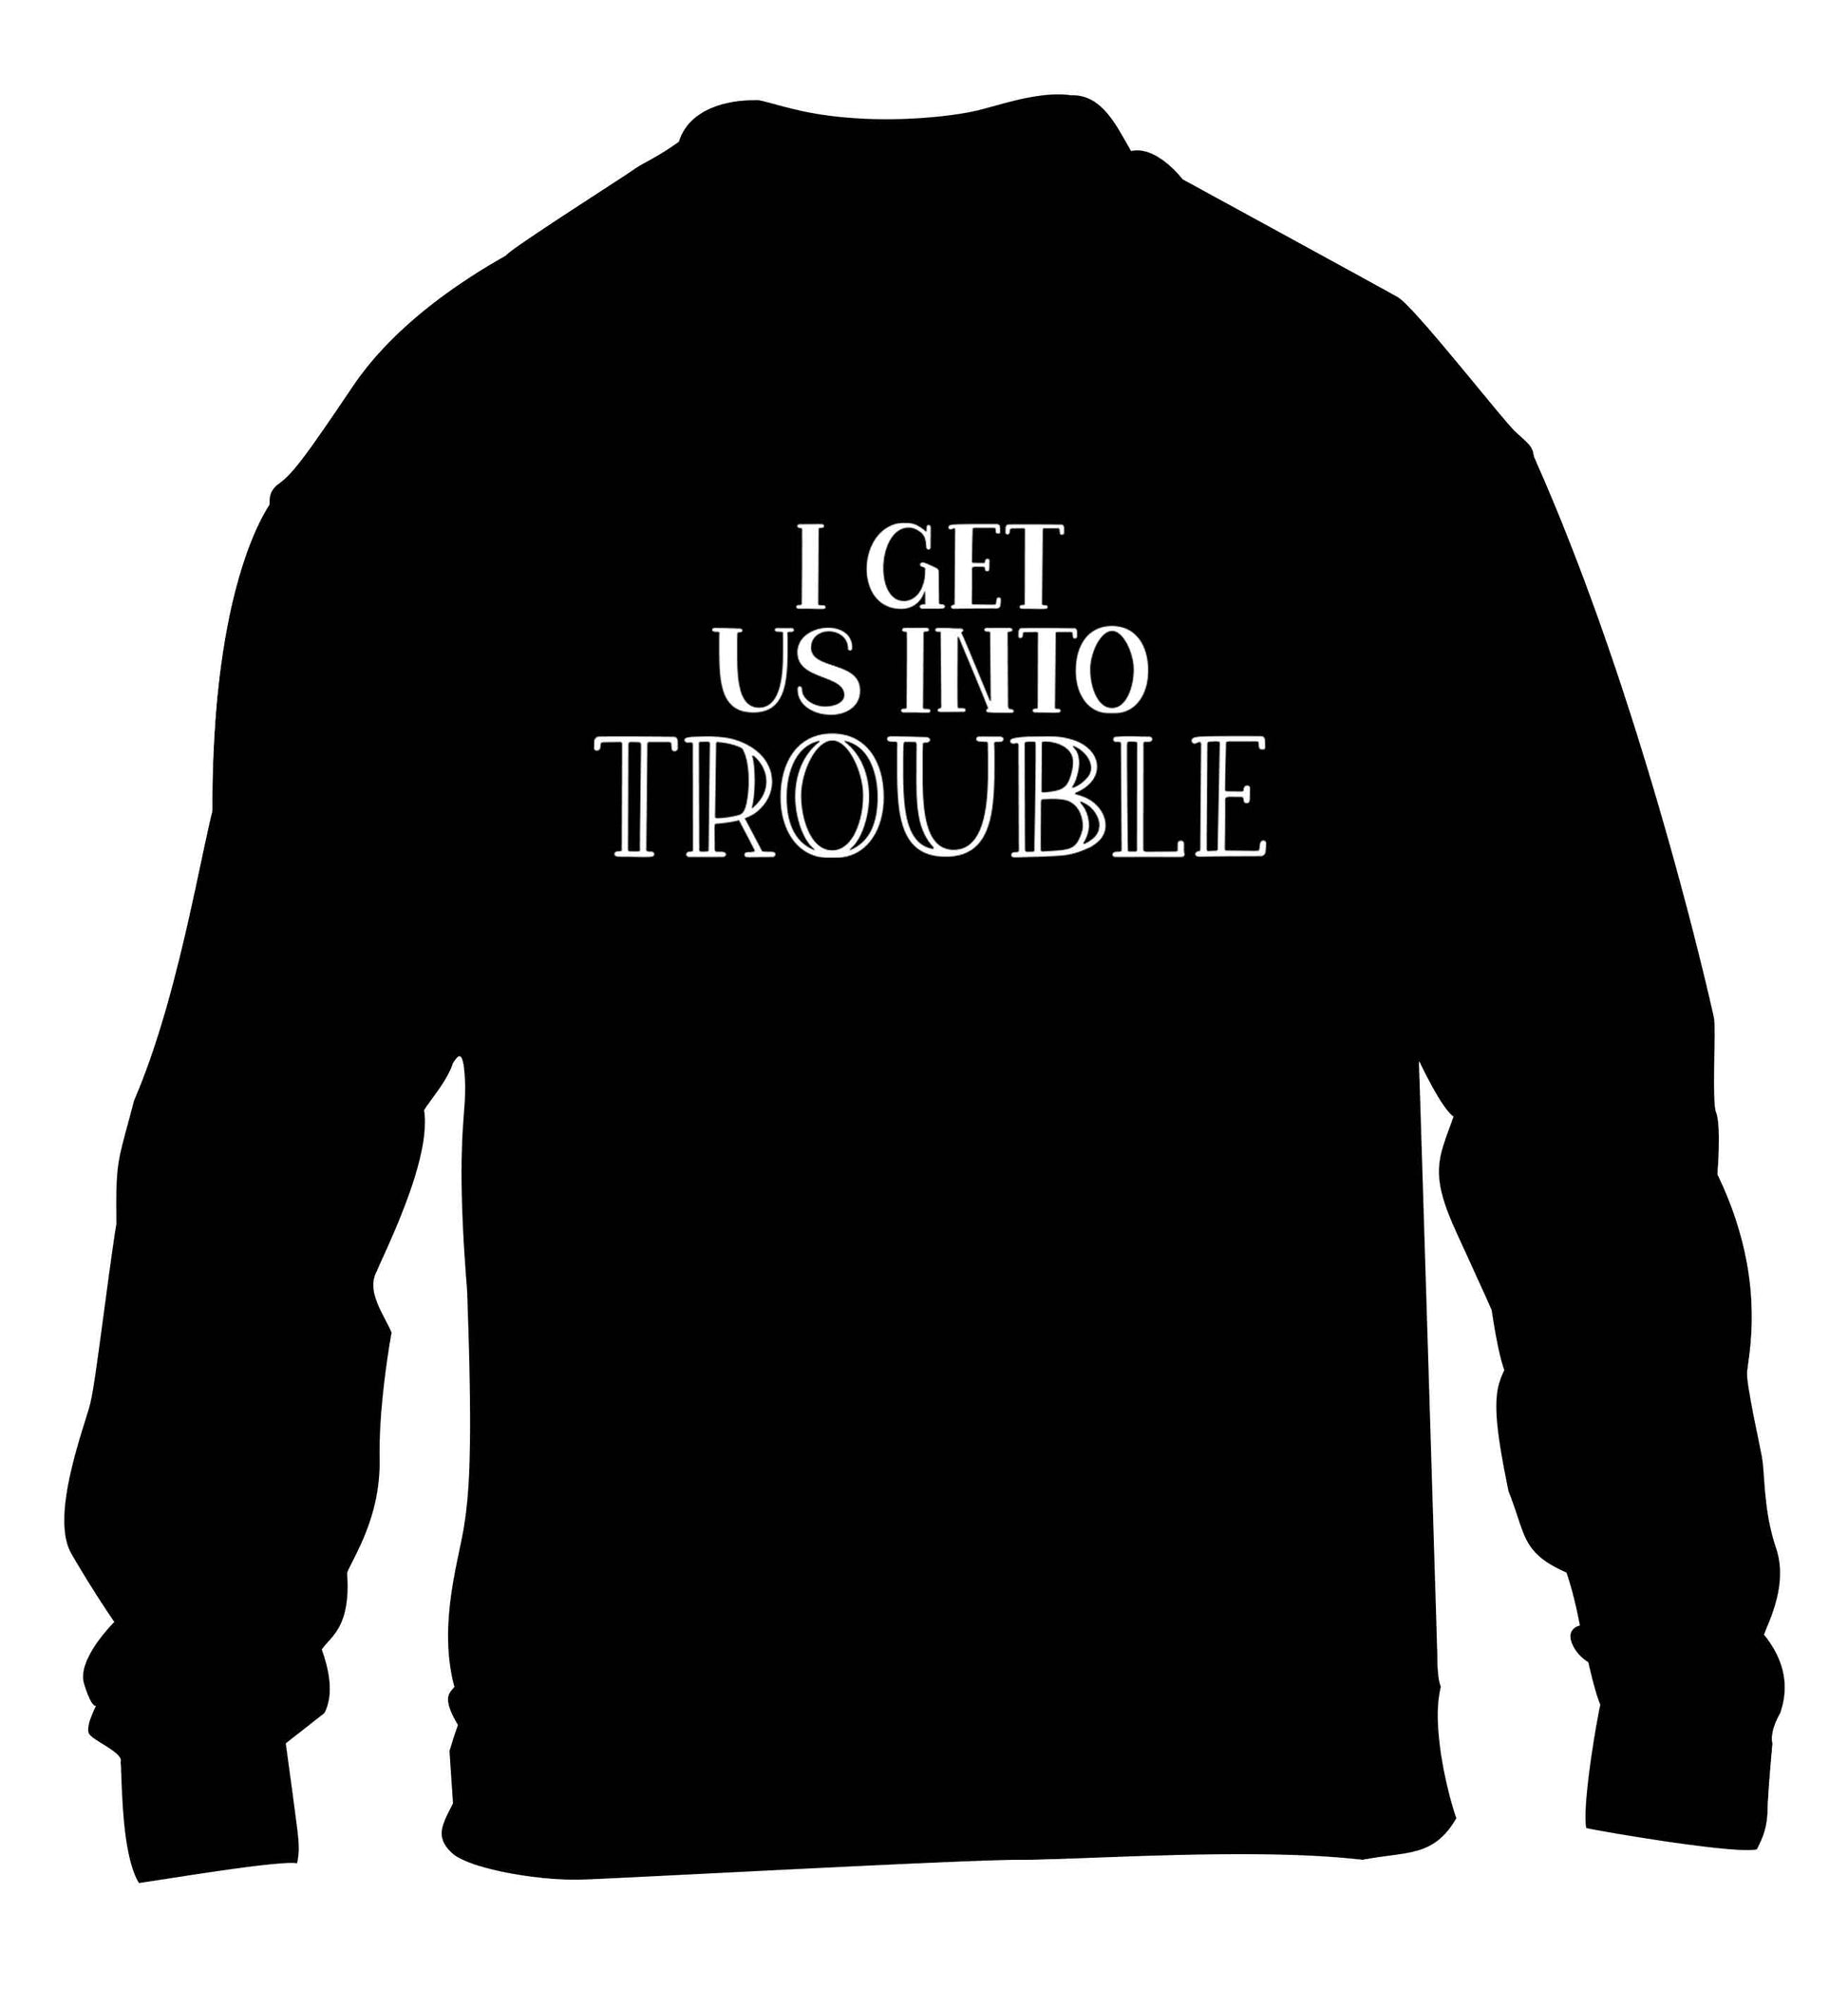 I get us into trouble children's black sweater 12-13 Years